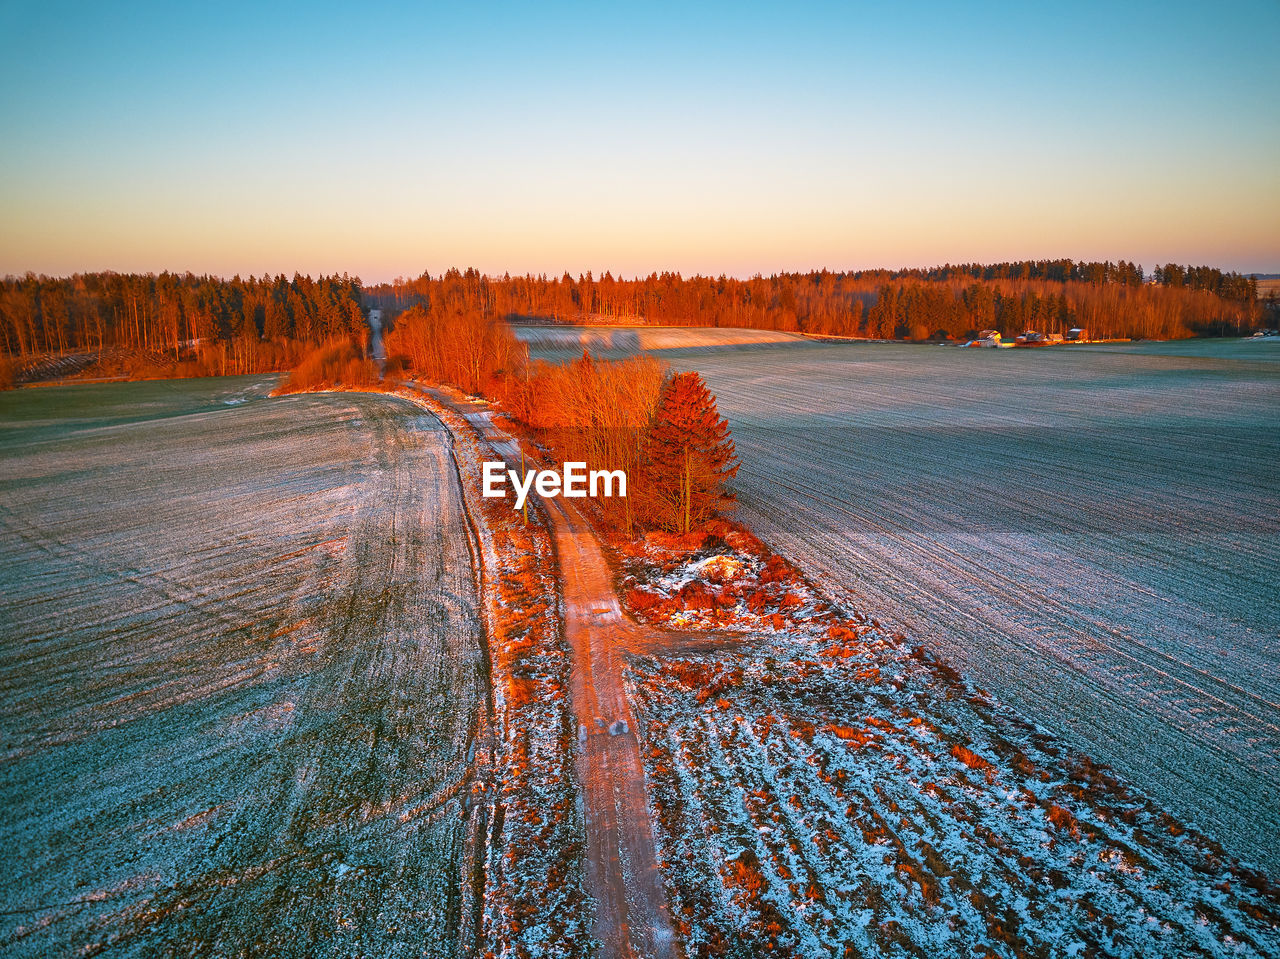 Winter green agricultural field winter crops  snow. tree december sunset aerial scene. rural road